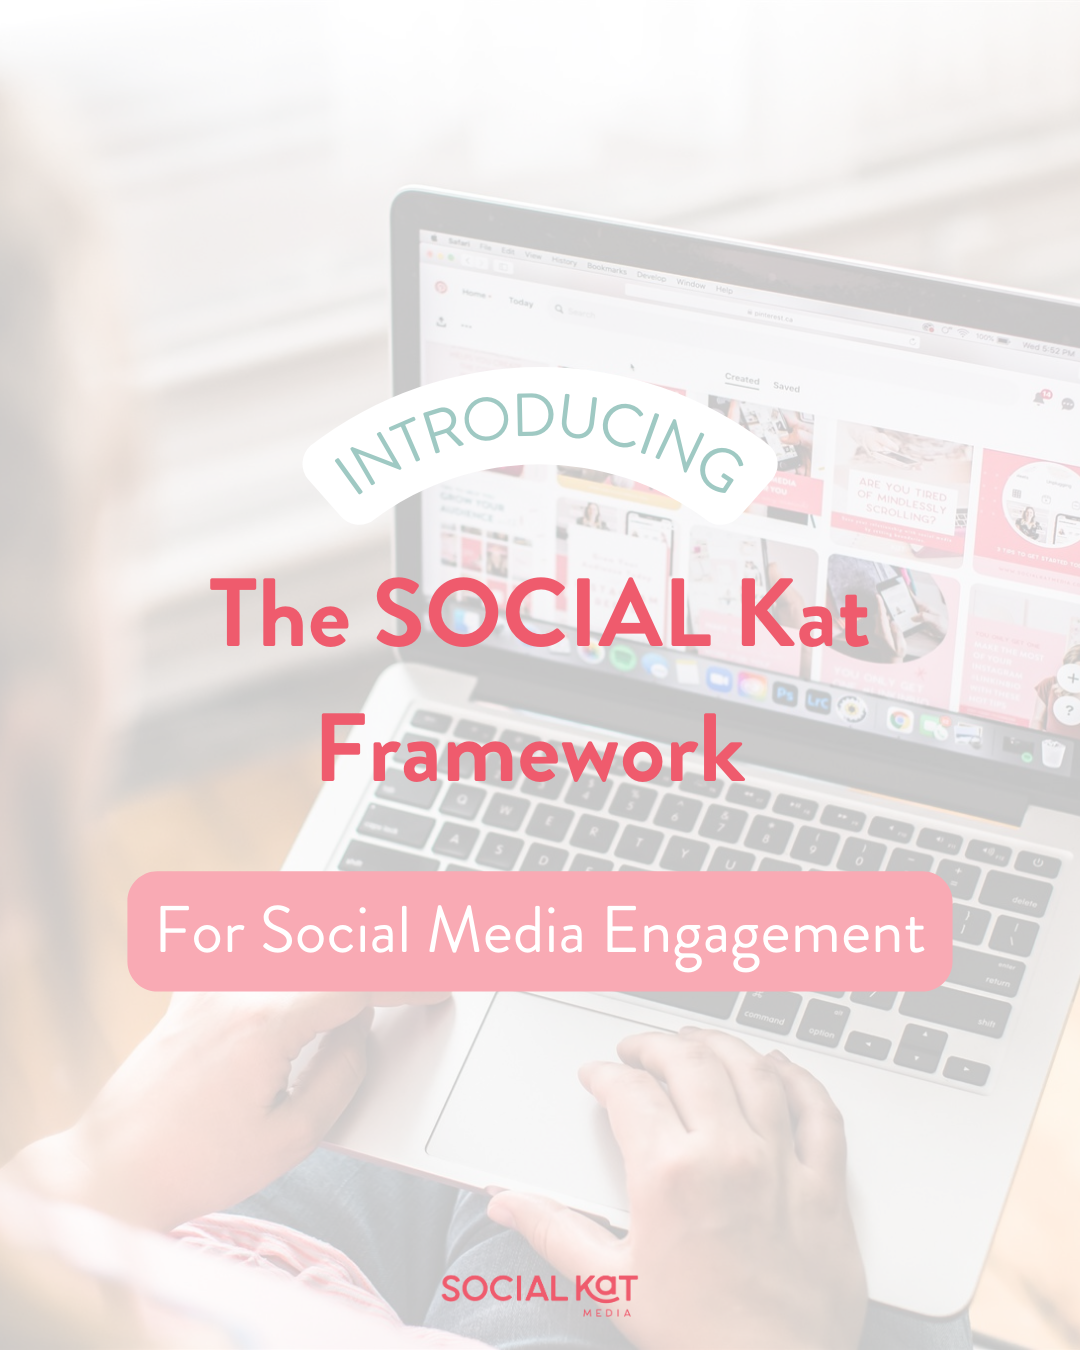 Introducing the social kat framework for social media engagement. In the background you see hands typing on a laptop computer.